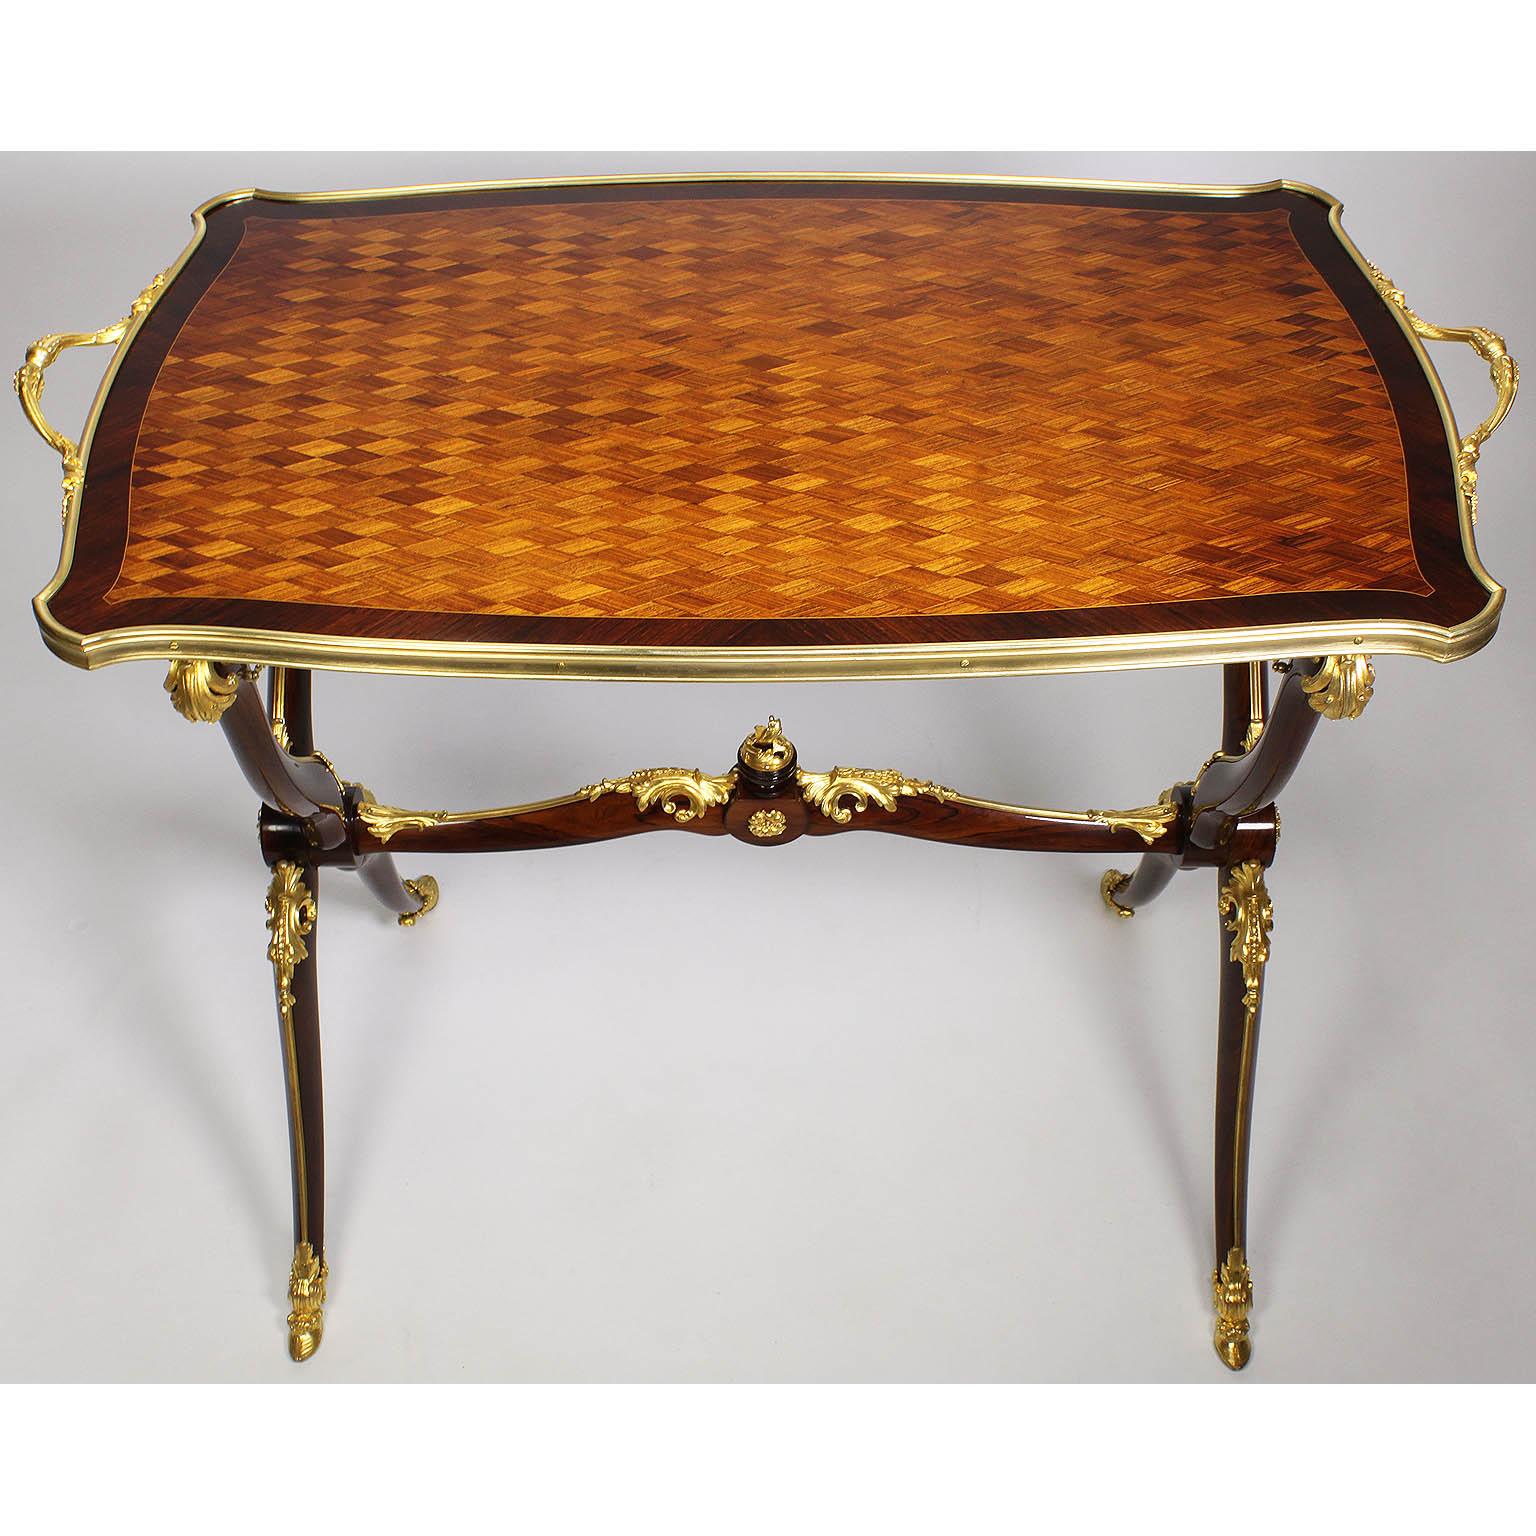 Carved French 19th Century Ormolu Mounted Kingwood Parquetry Tea-Table, François Linke